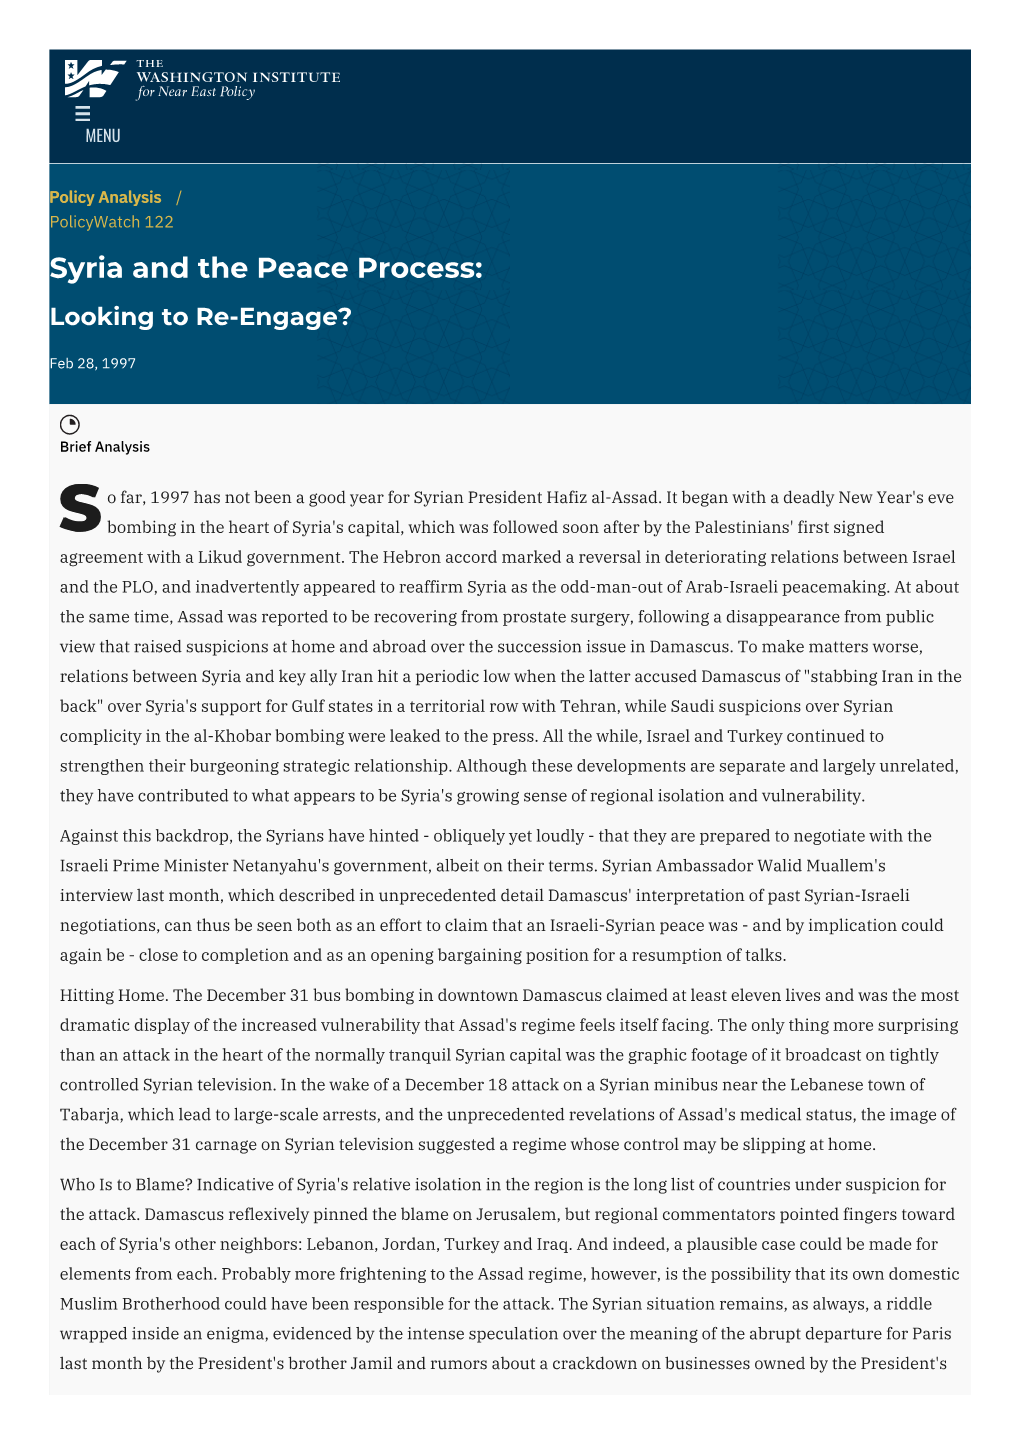 Syria and the Peace Process: Looking to Re-Engage?